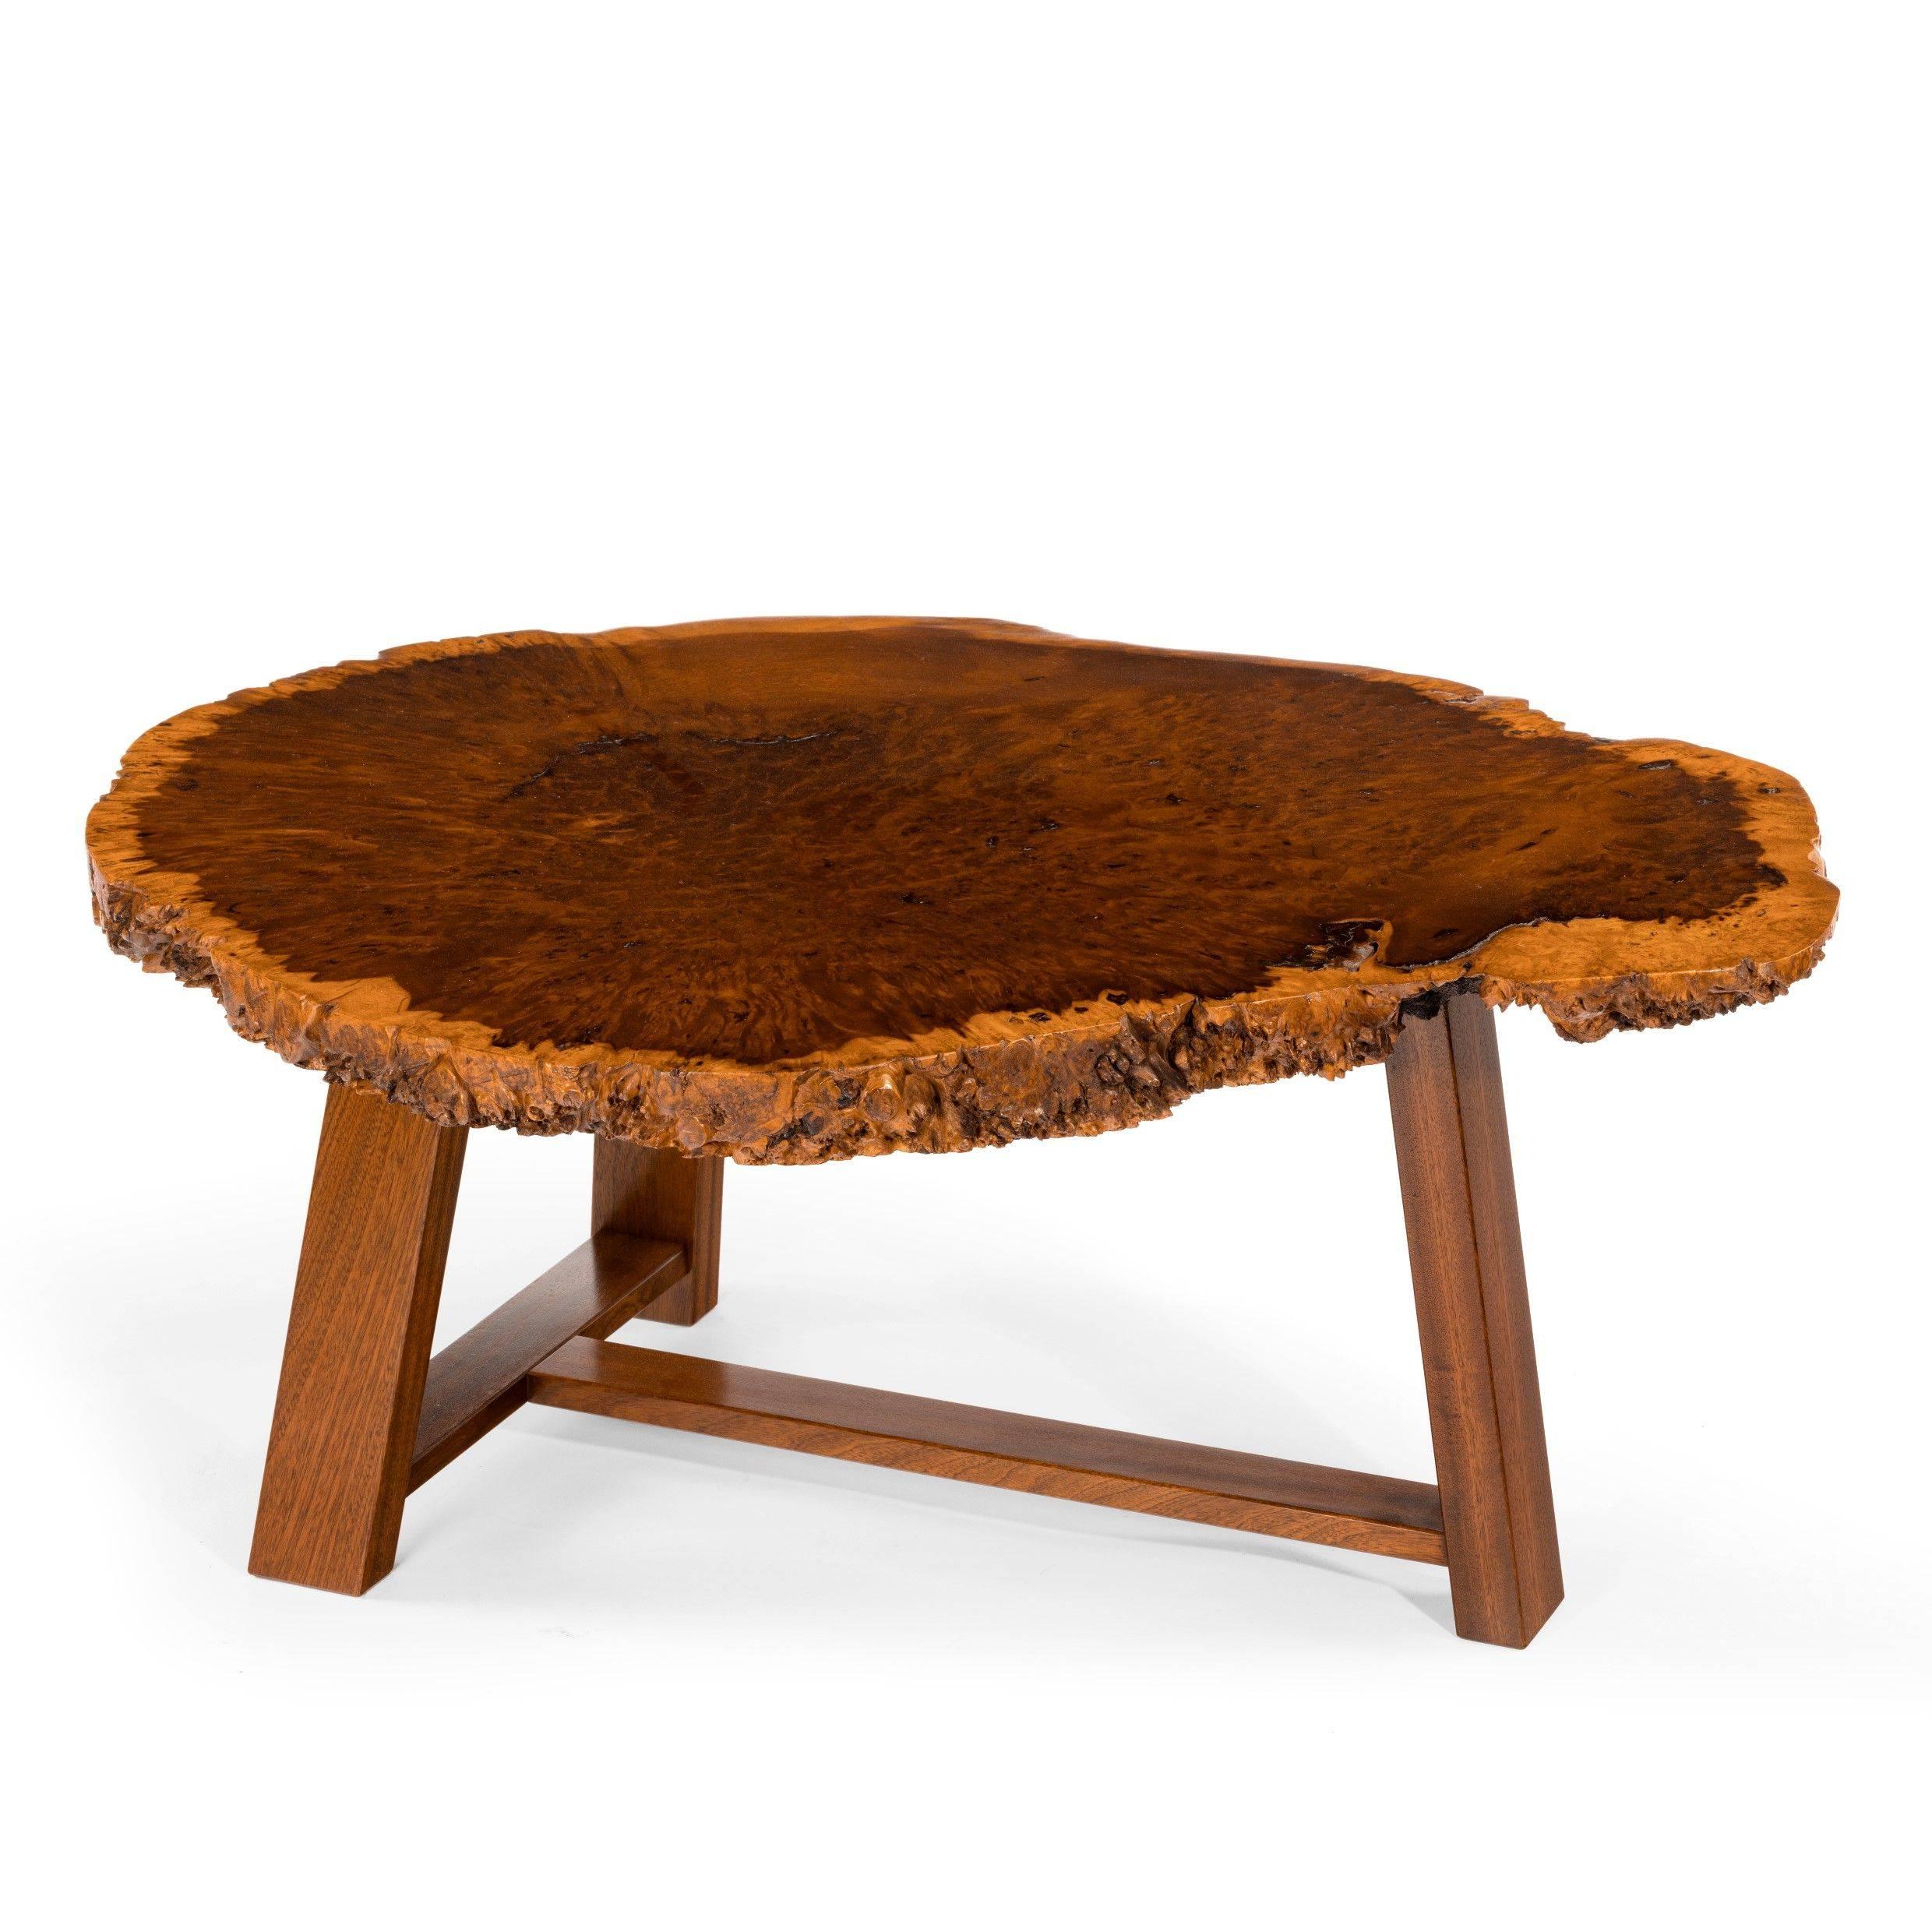 A stylish polished coffee tabletop, of irregular shape cut across the grain to show a central burr surrounded by a wide outer border of paler
wood, set on a modern base.